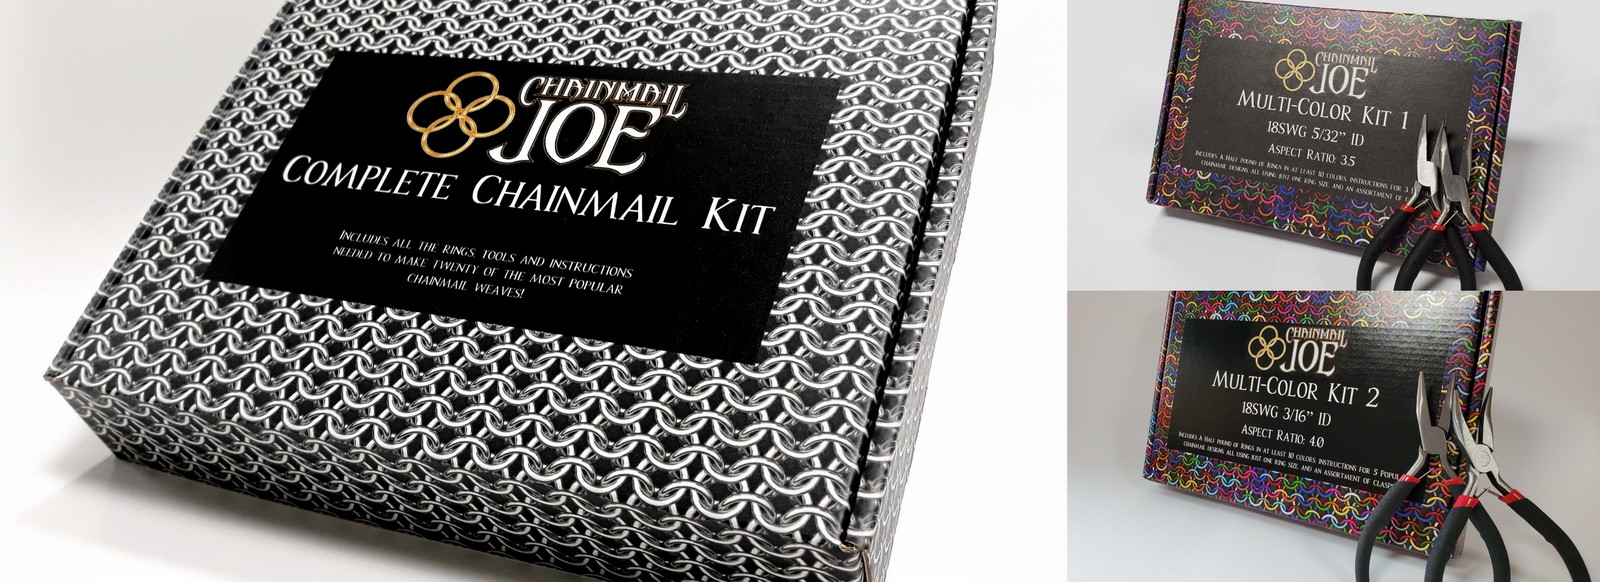  Chainmail Joe European 4 in 1, Round Mail, Sweet Pea, and  Spiral 4 in 1 Multi-Color/Weave Kit with a Half Pound of Rings(4,000 Rings)  in at Least 10 Colors, Pliers Included 